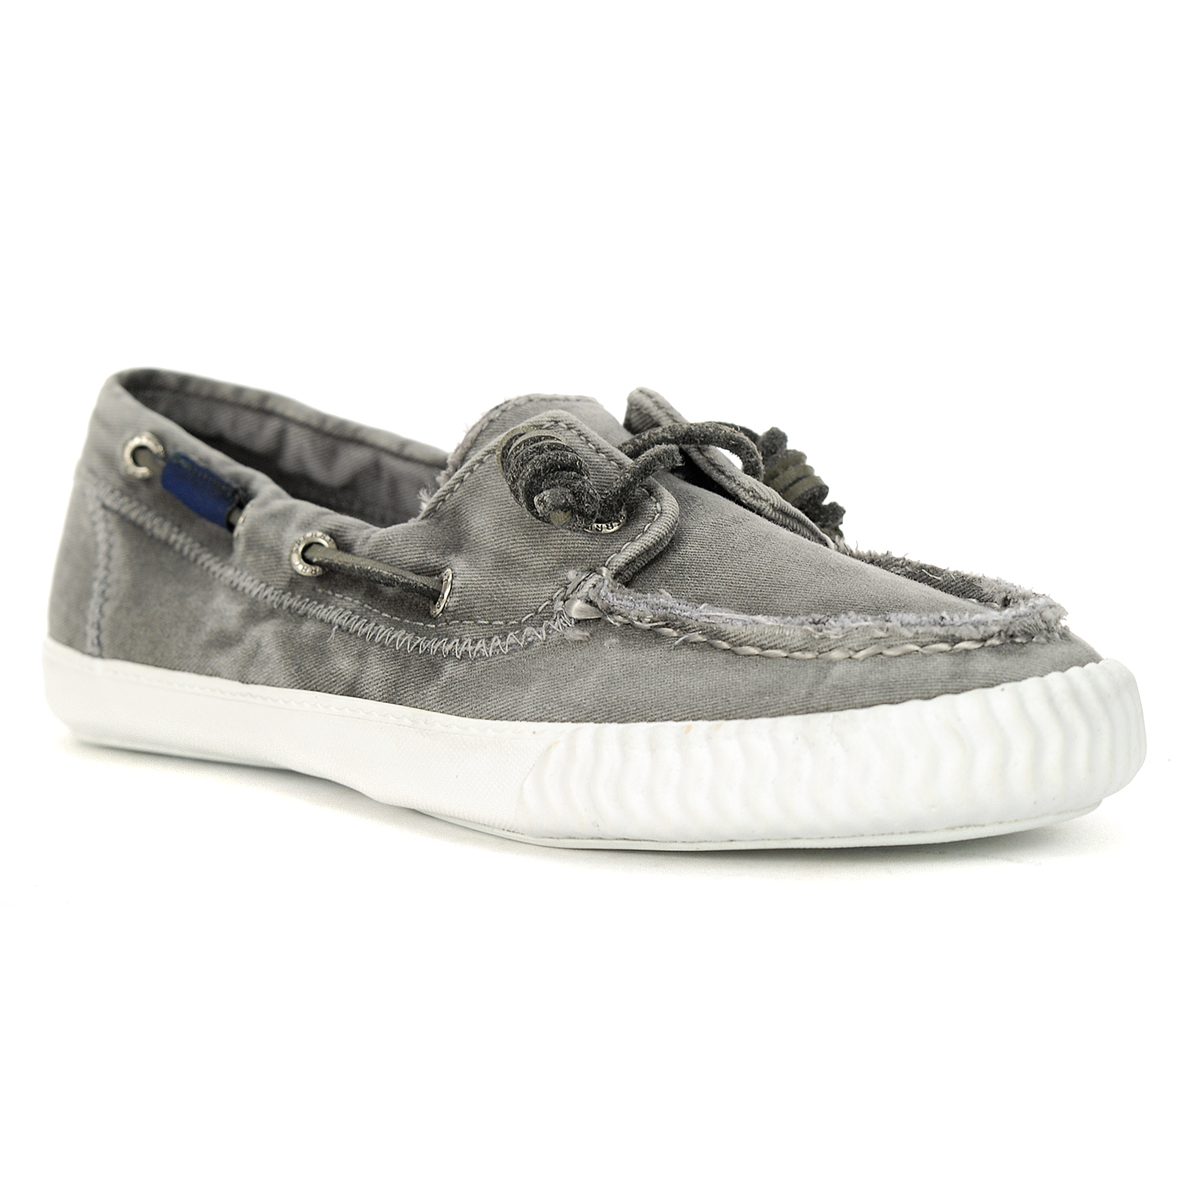 sperry women's sayel away boat shoes